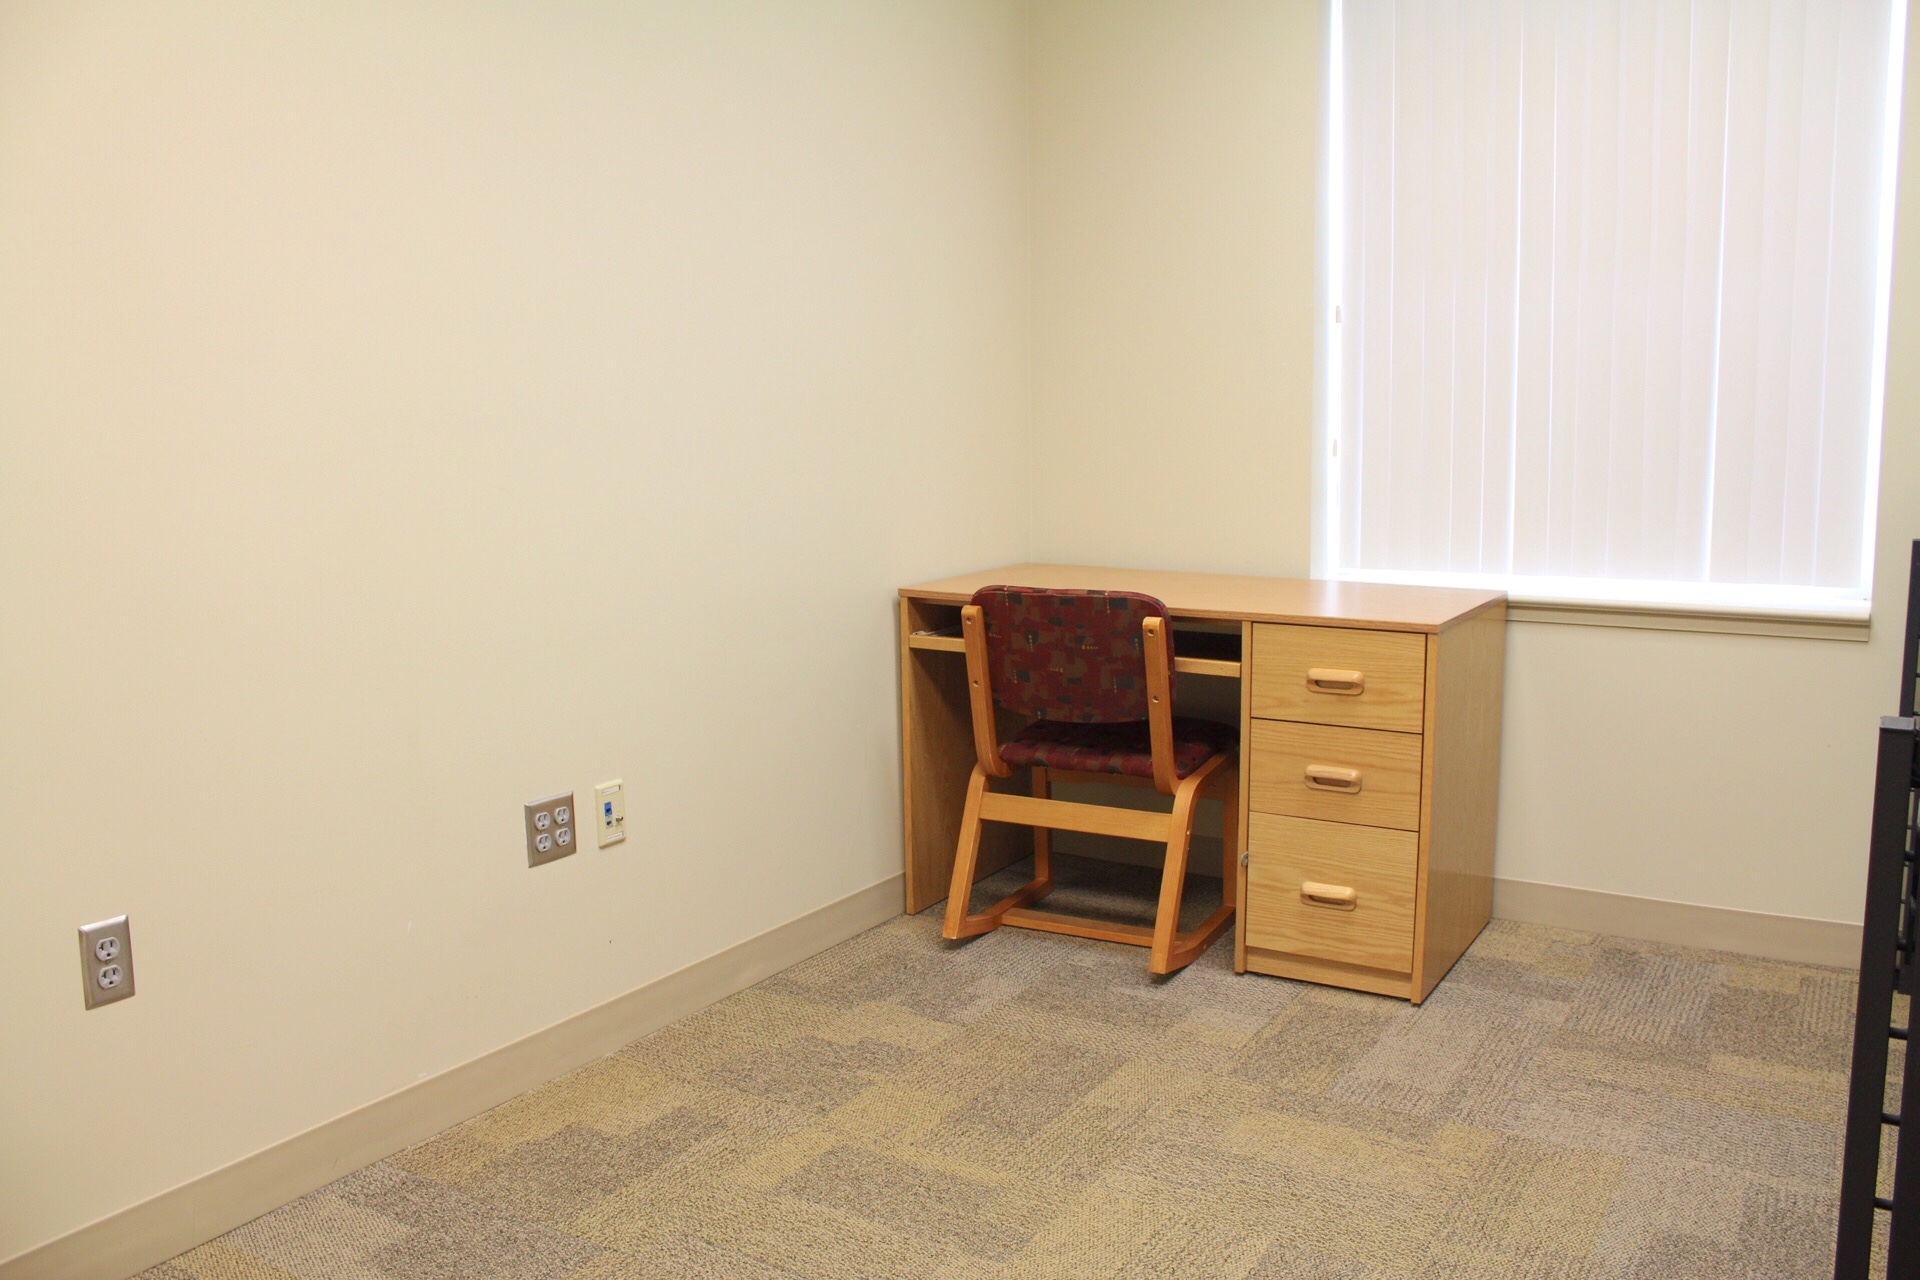 Morgan Hall room with desk and chair located by a window.